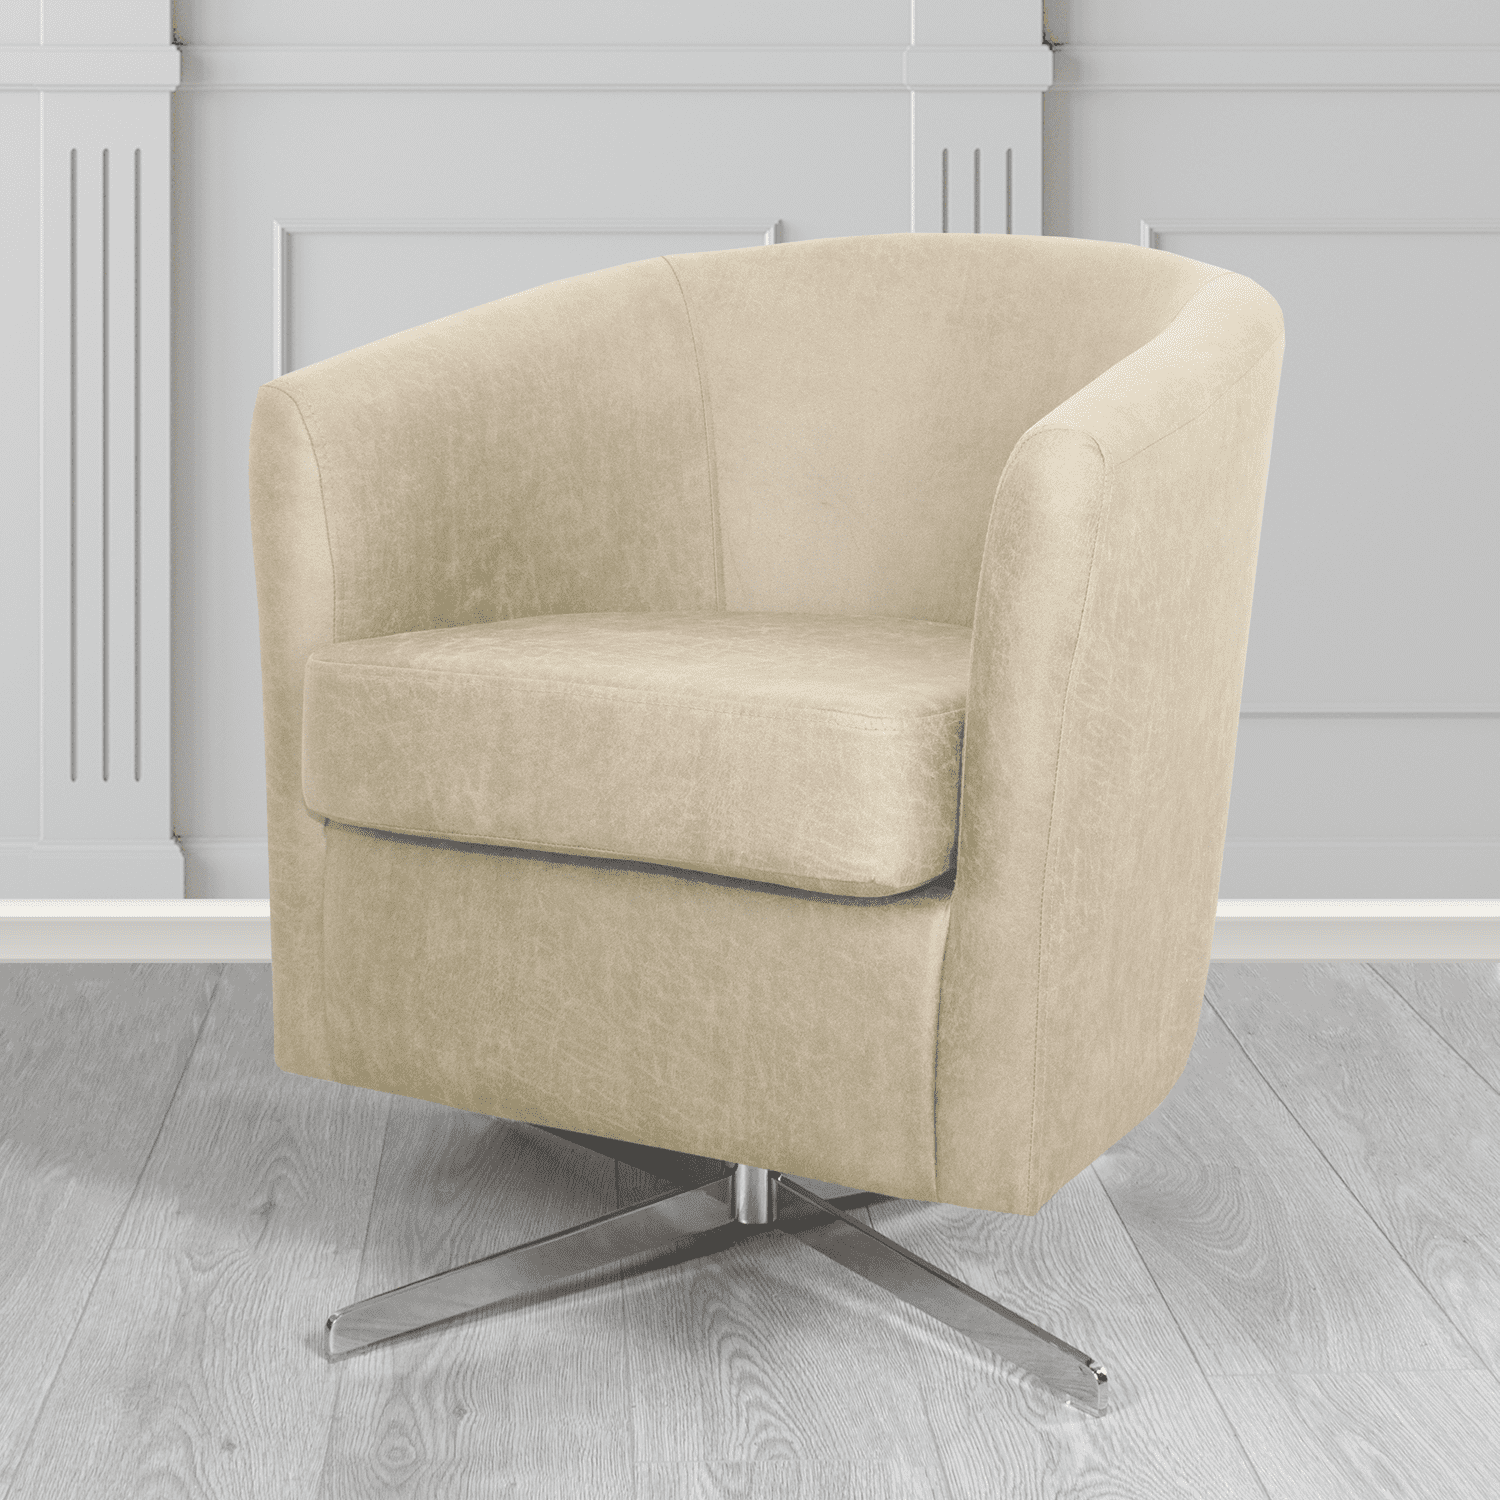 Cannes Swivel Tub Chair in Nevada Beige Faux Leather - The Tub Chair Shop